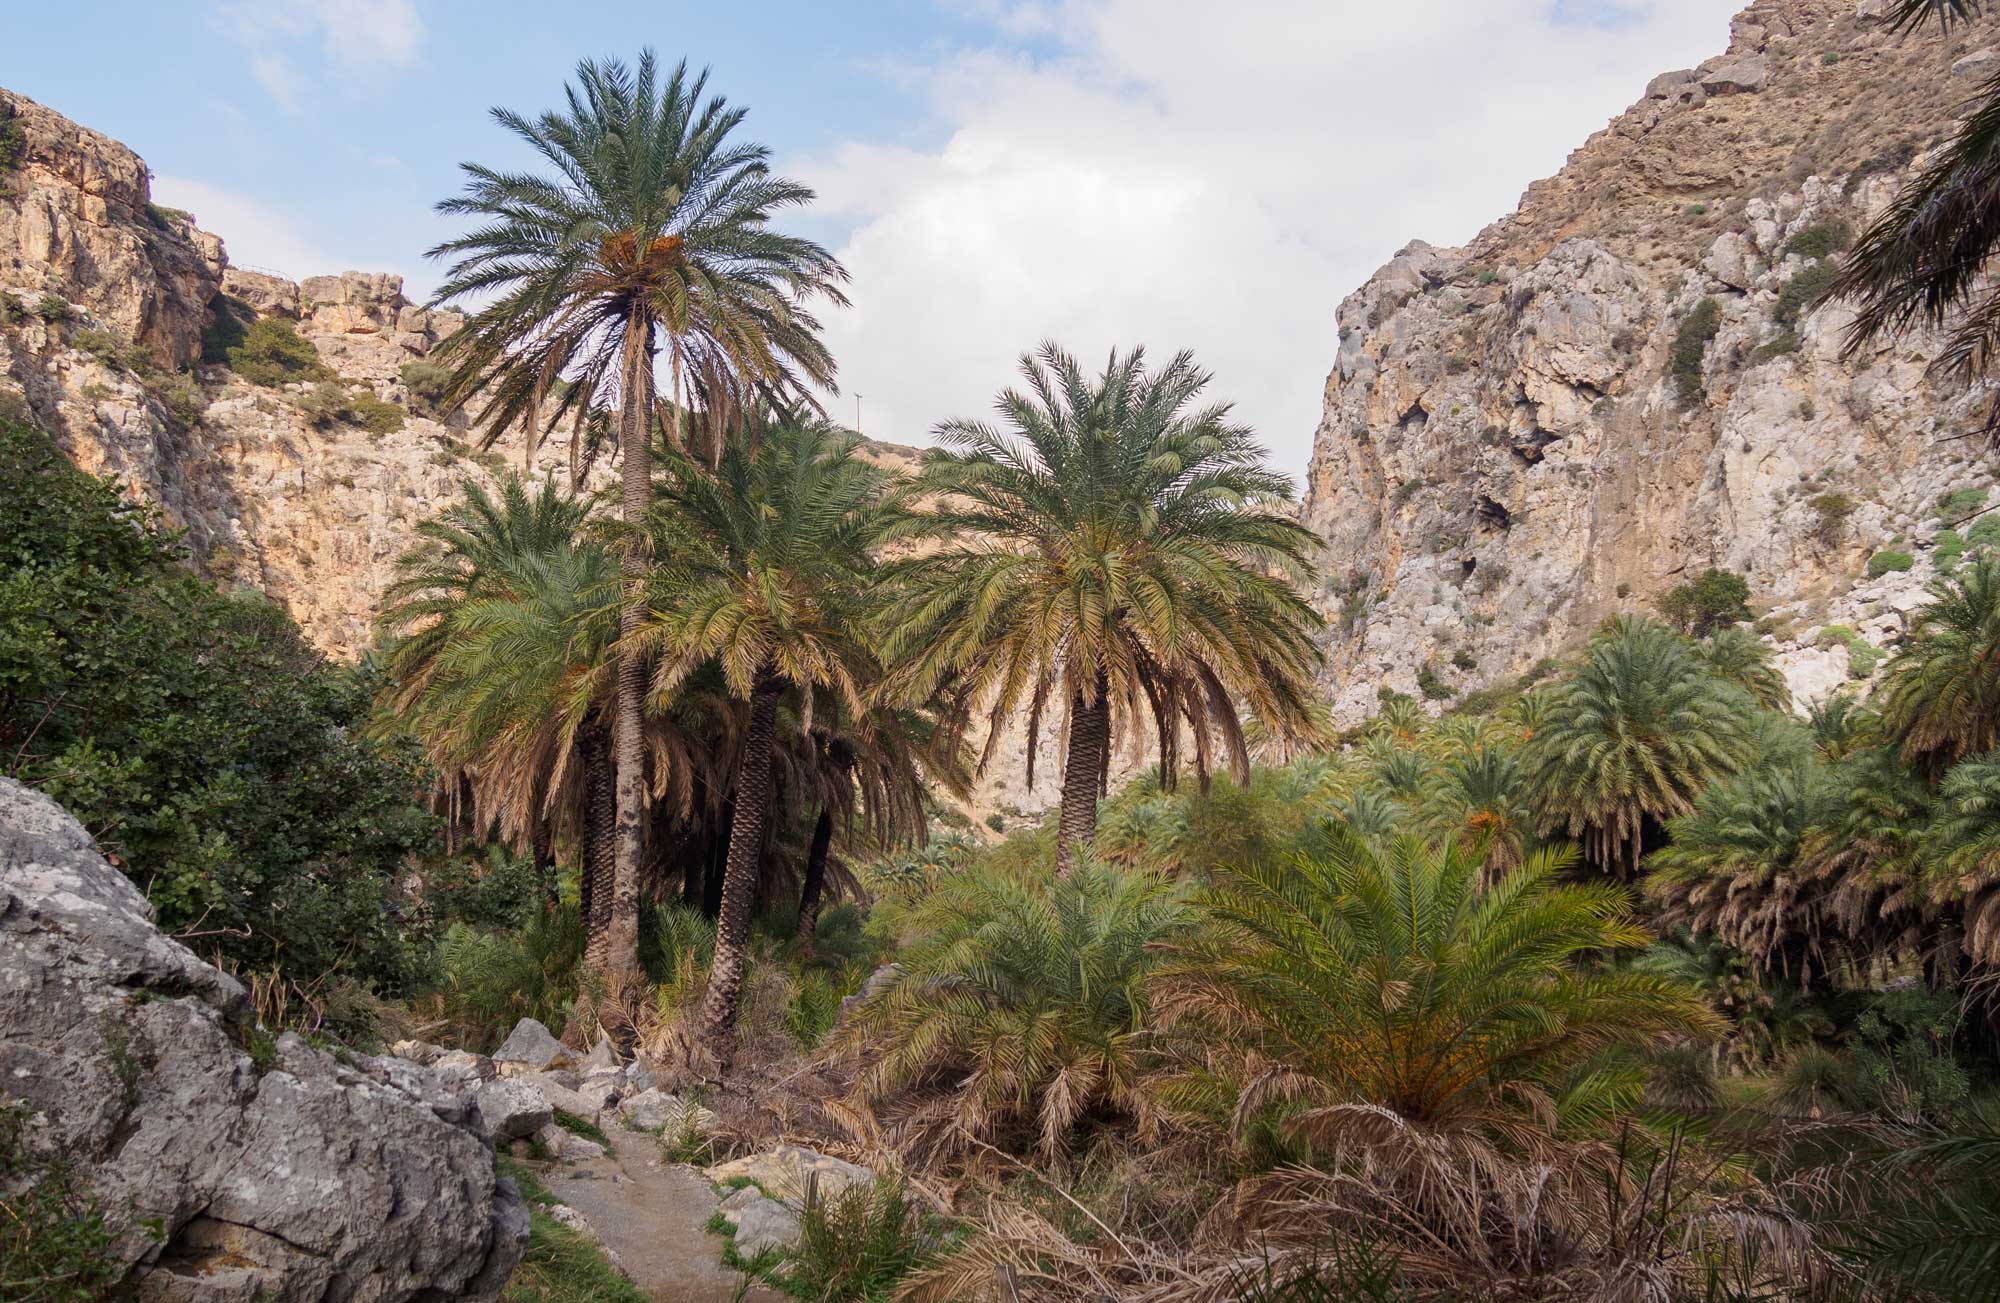 Photograph of a group of palm trees growing in from of tan rocky cliffs. Shorter palm trees are visible in the foreground.